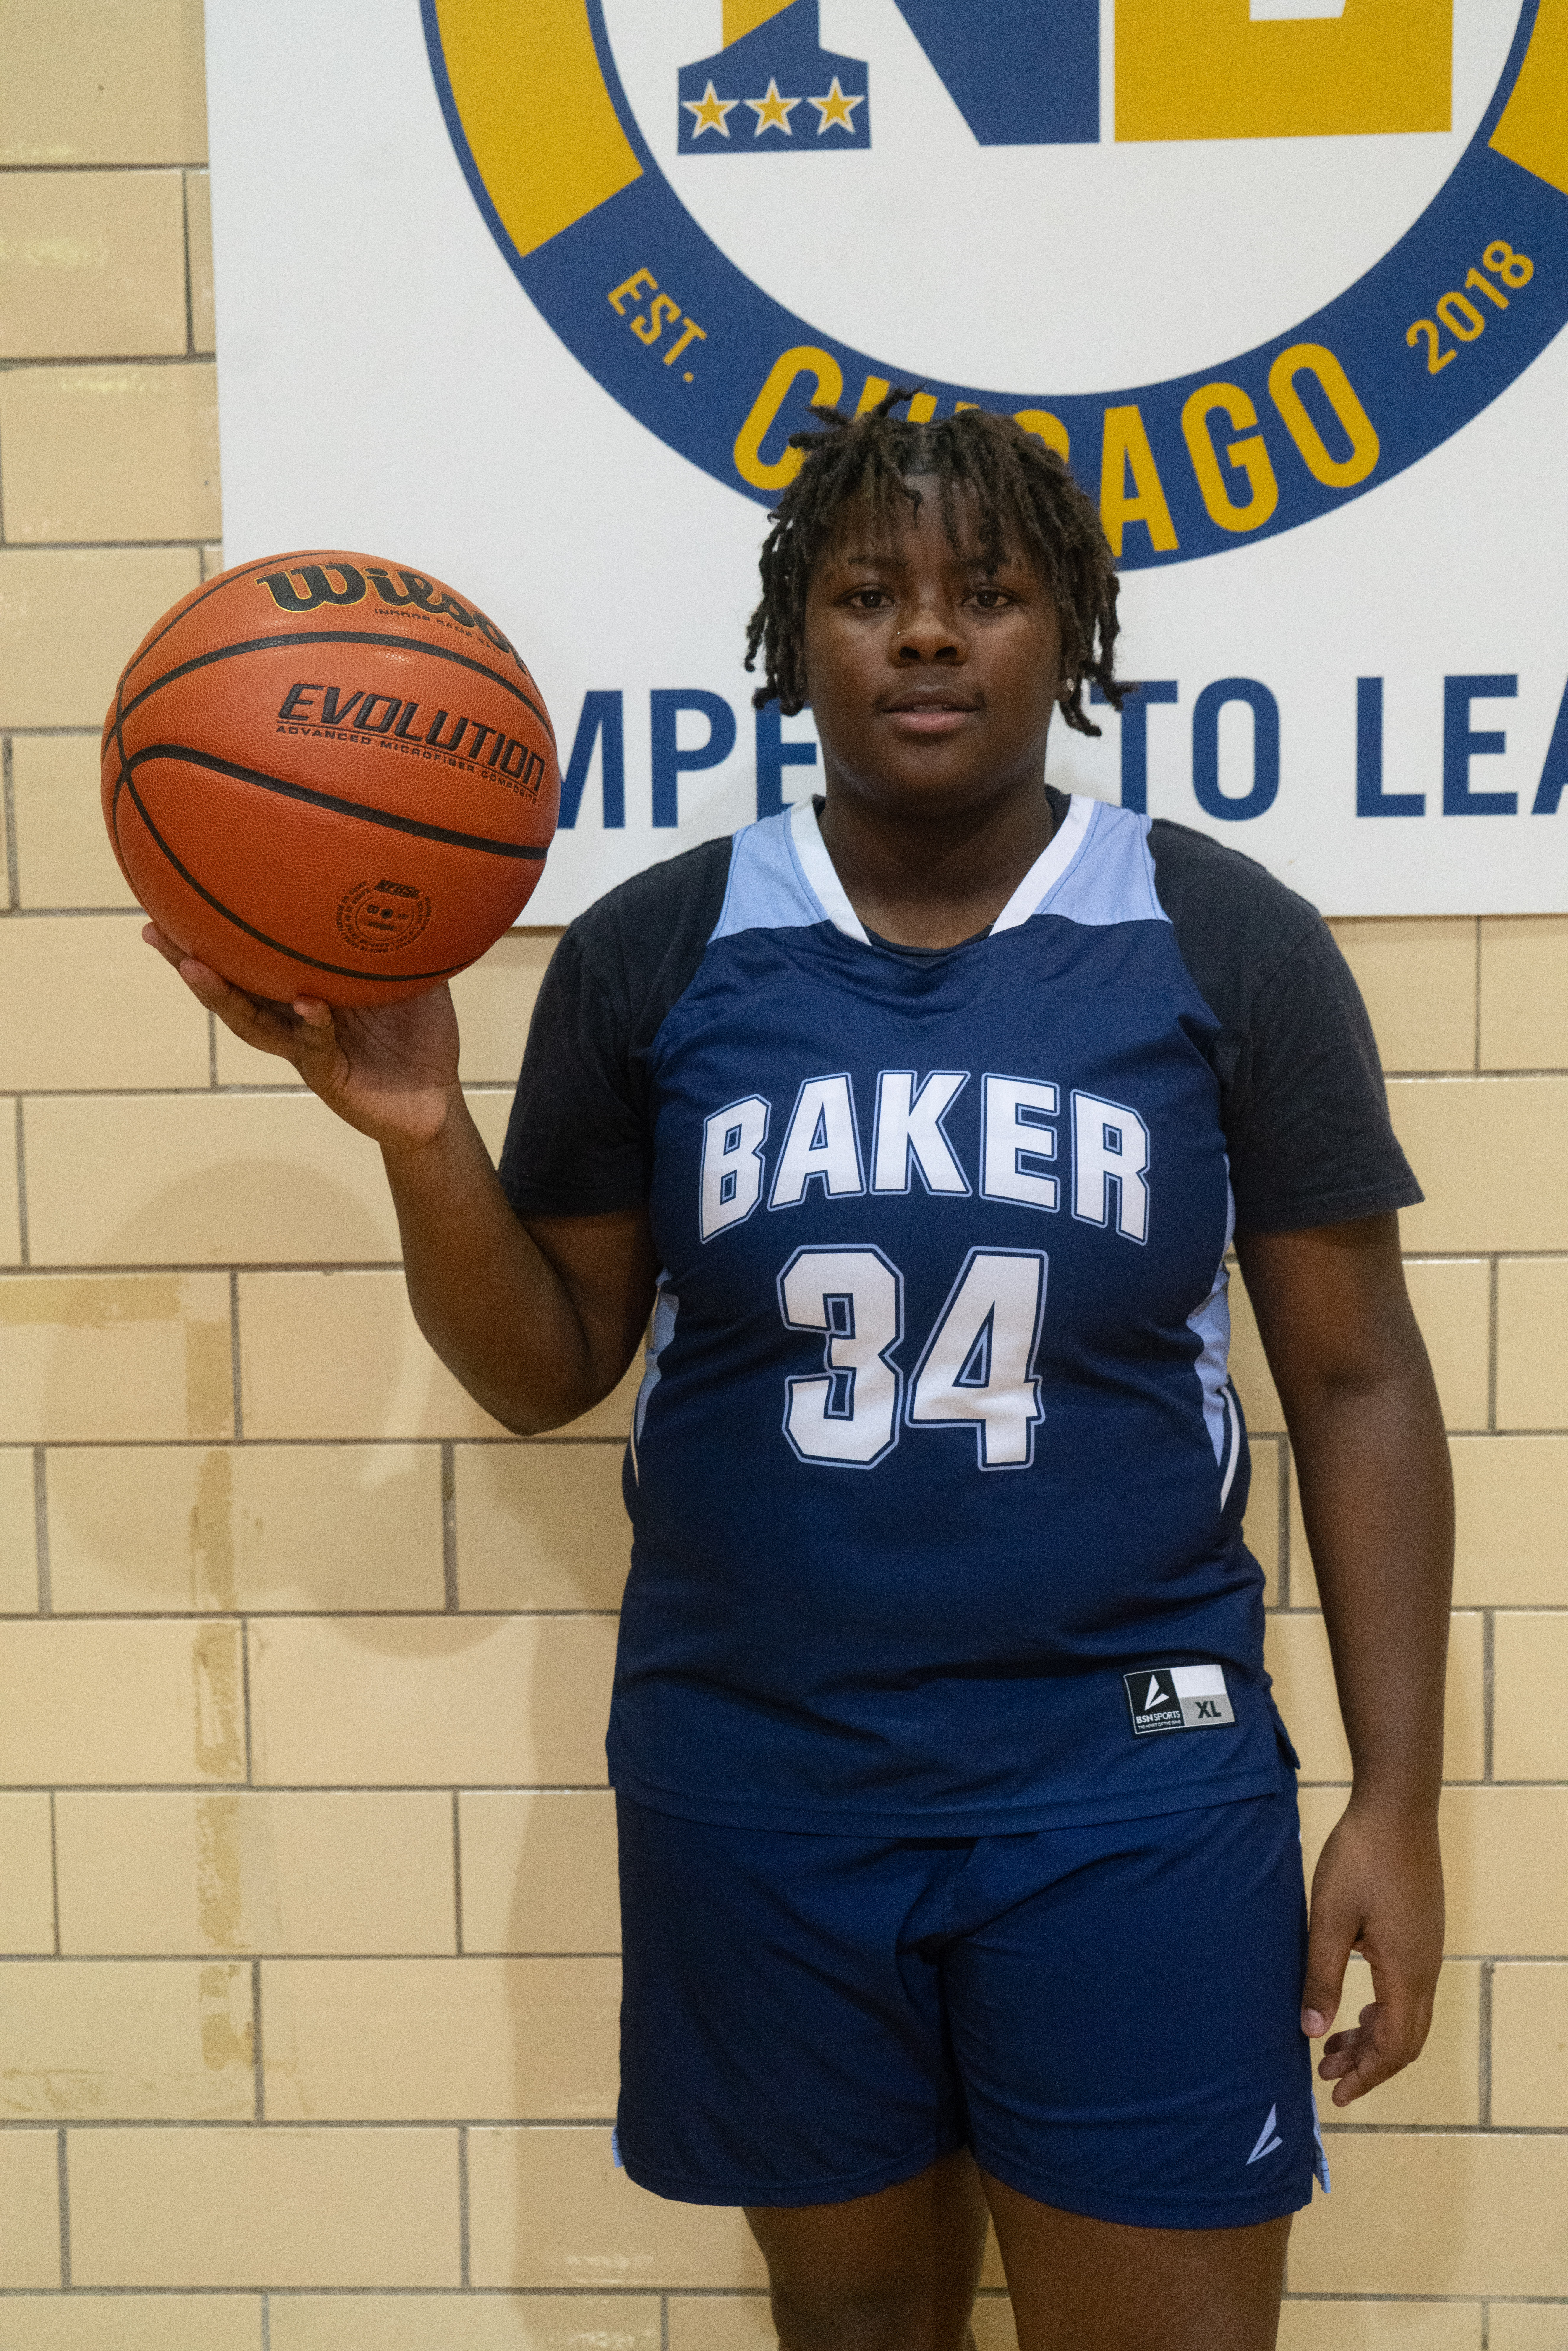 Photo shows Serenity Curry, a recent alum of Baker College Prep. She is a Black girl with short locs and is wearing her Baker basketball uniform with the number 34 on it. She is holding a basketball in her right hand.